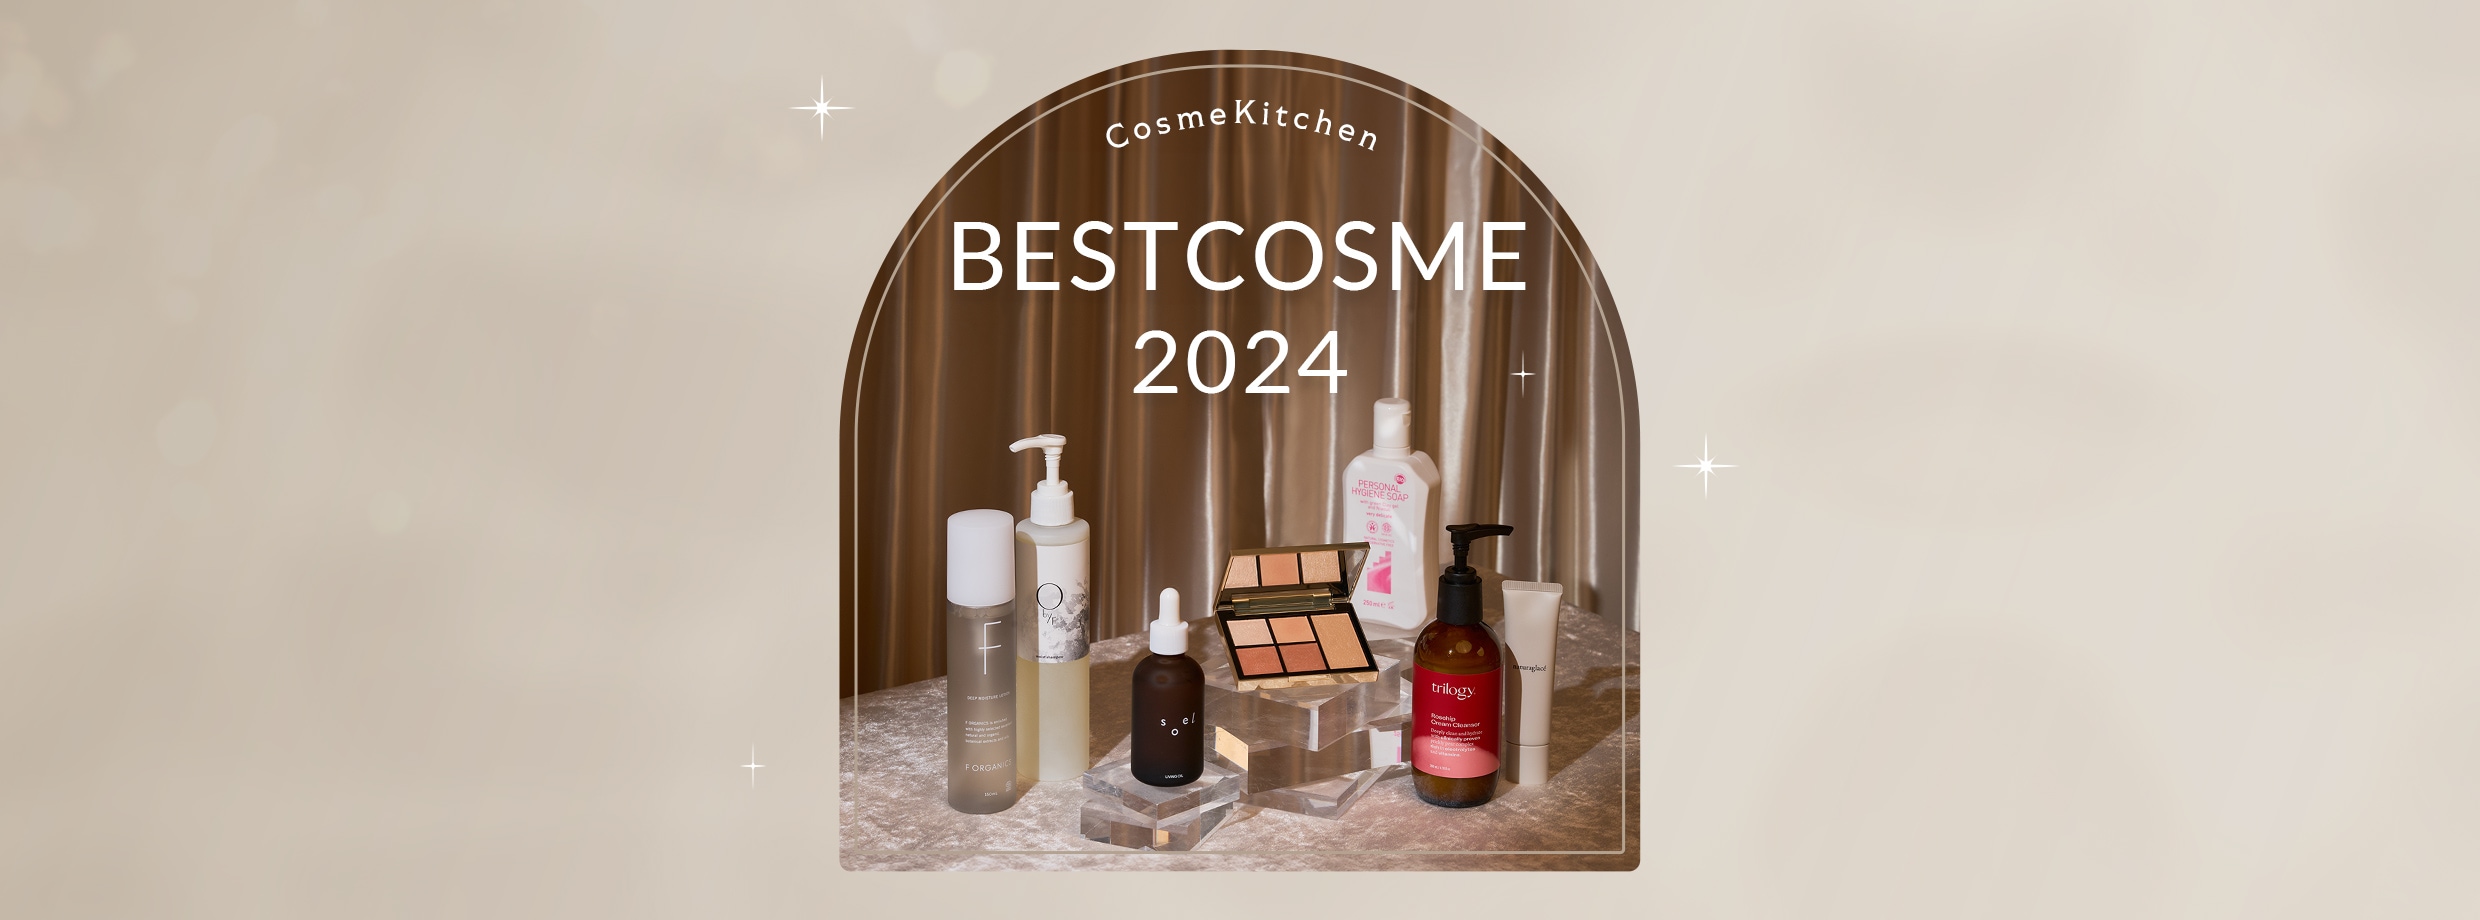 Cosme Kitchen BEST COSME 2024 2024年上半期で最も愛されたアイテムは!?